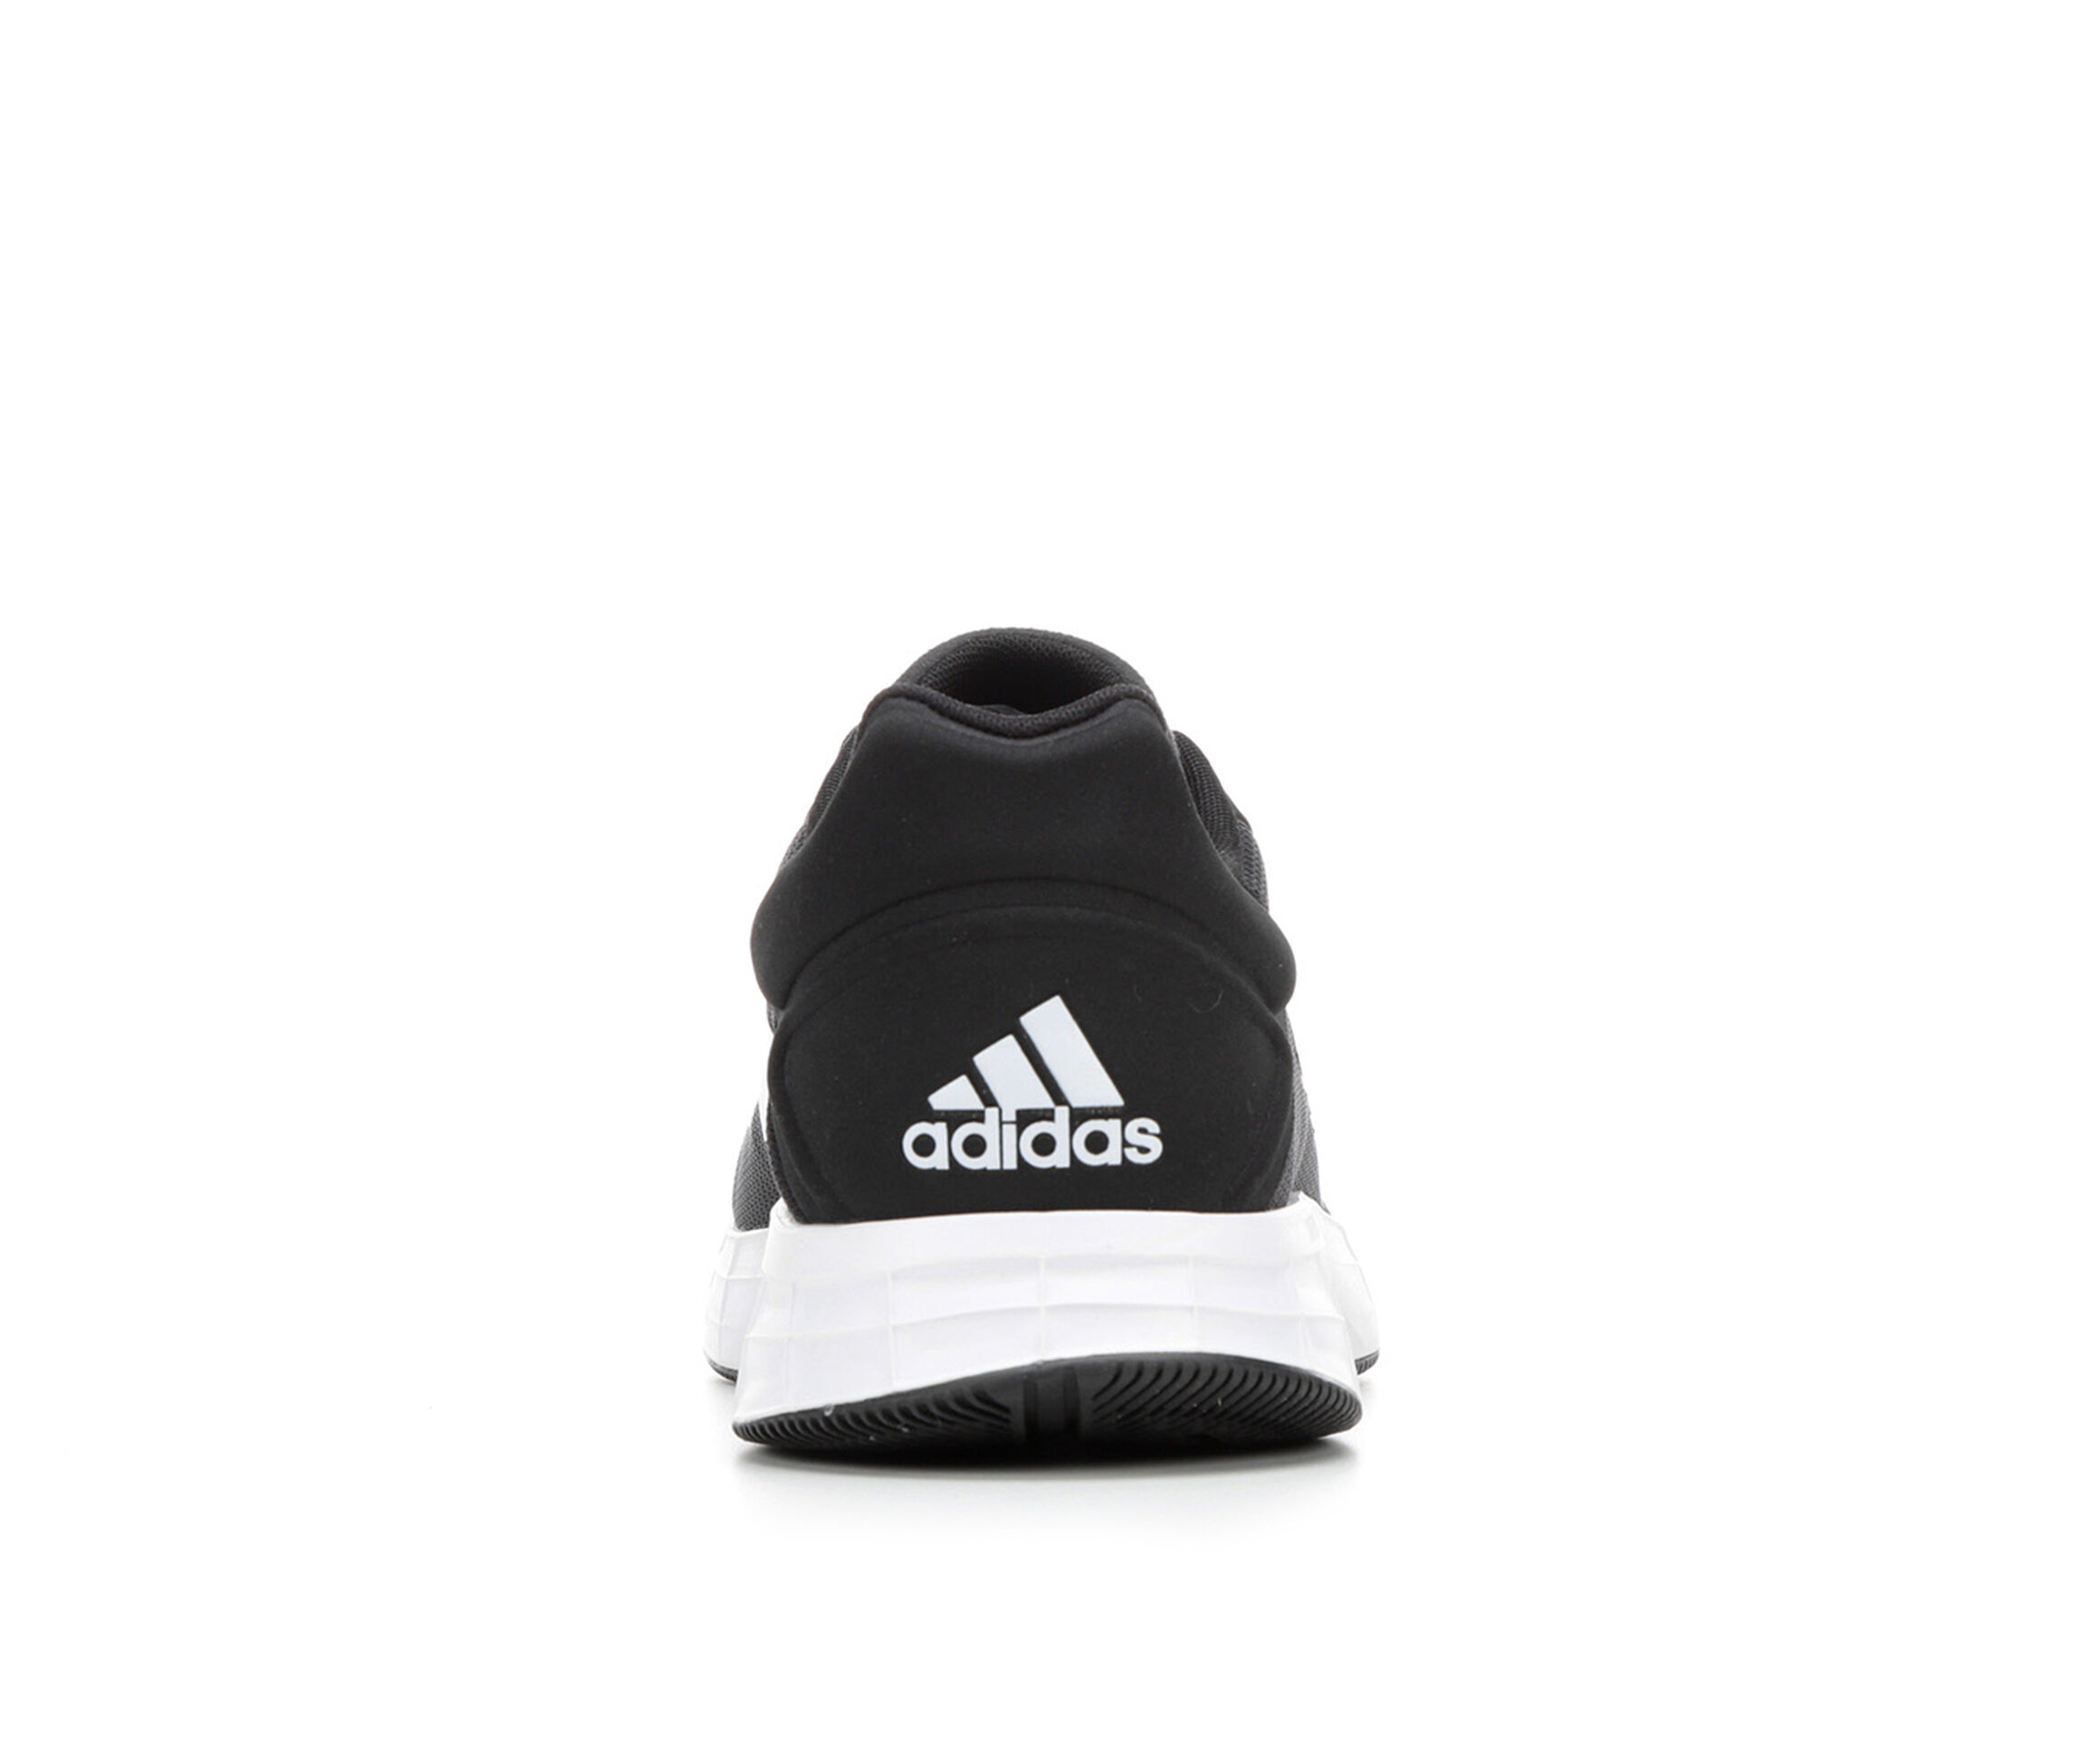 Adidas Men's Sneakers, Slides, and Accessories